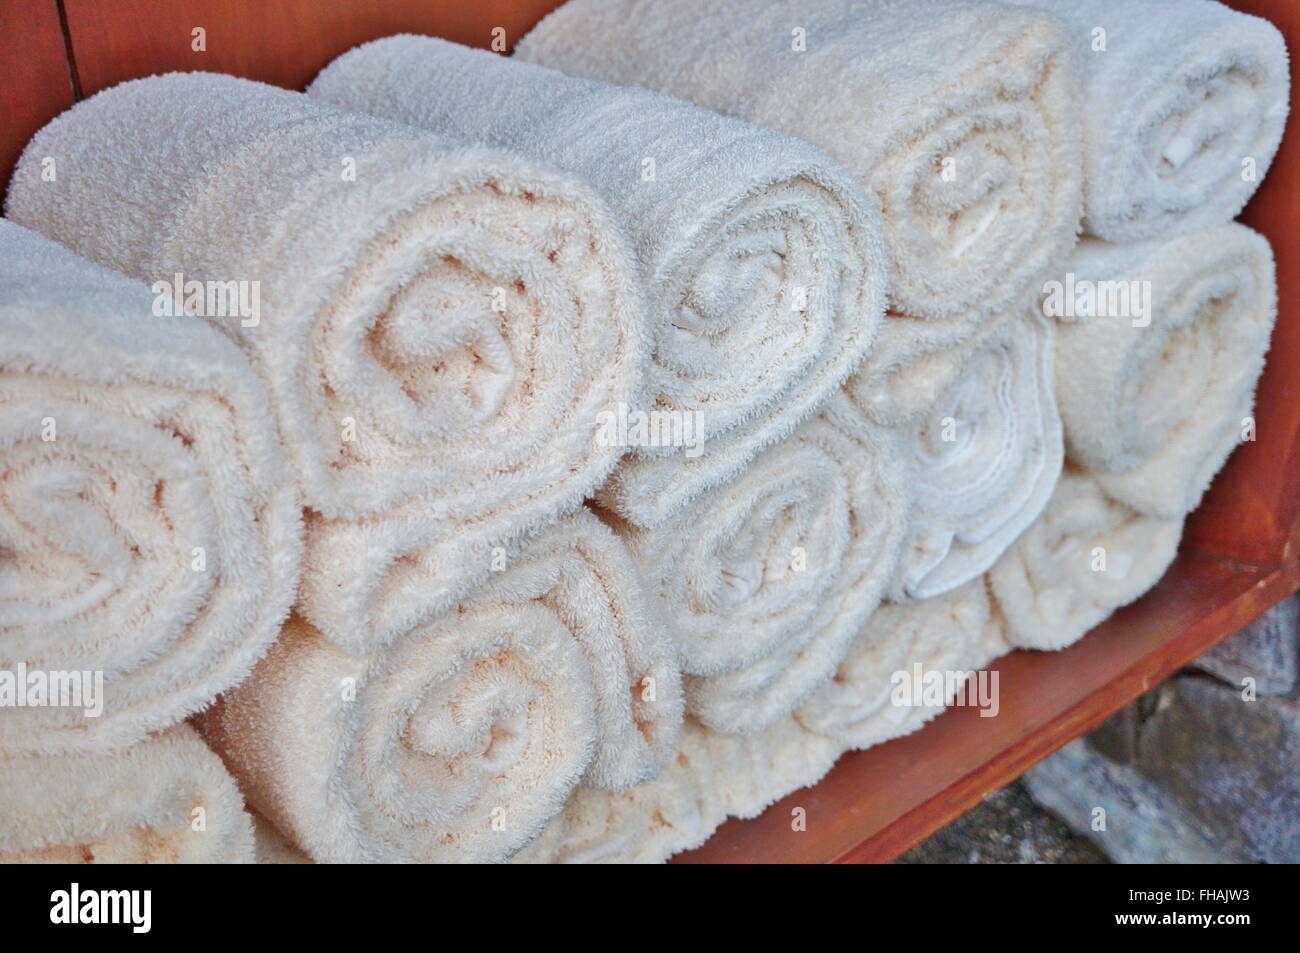 Small Kitchen Towels Rolled Up Bath Towels Stock Image - Image of